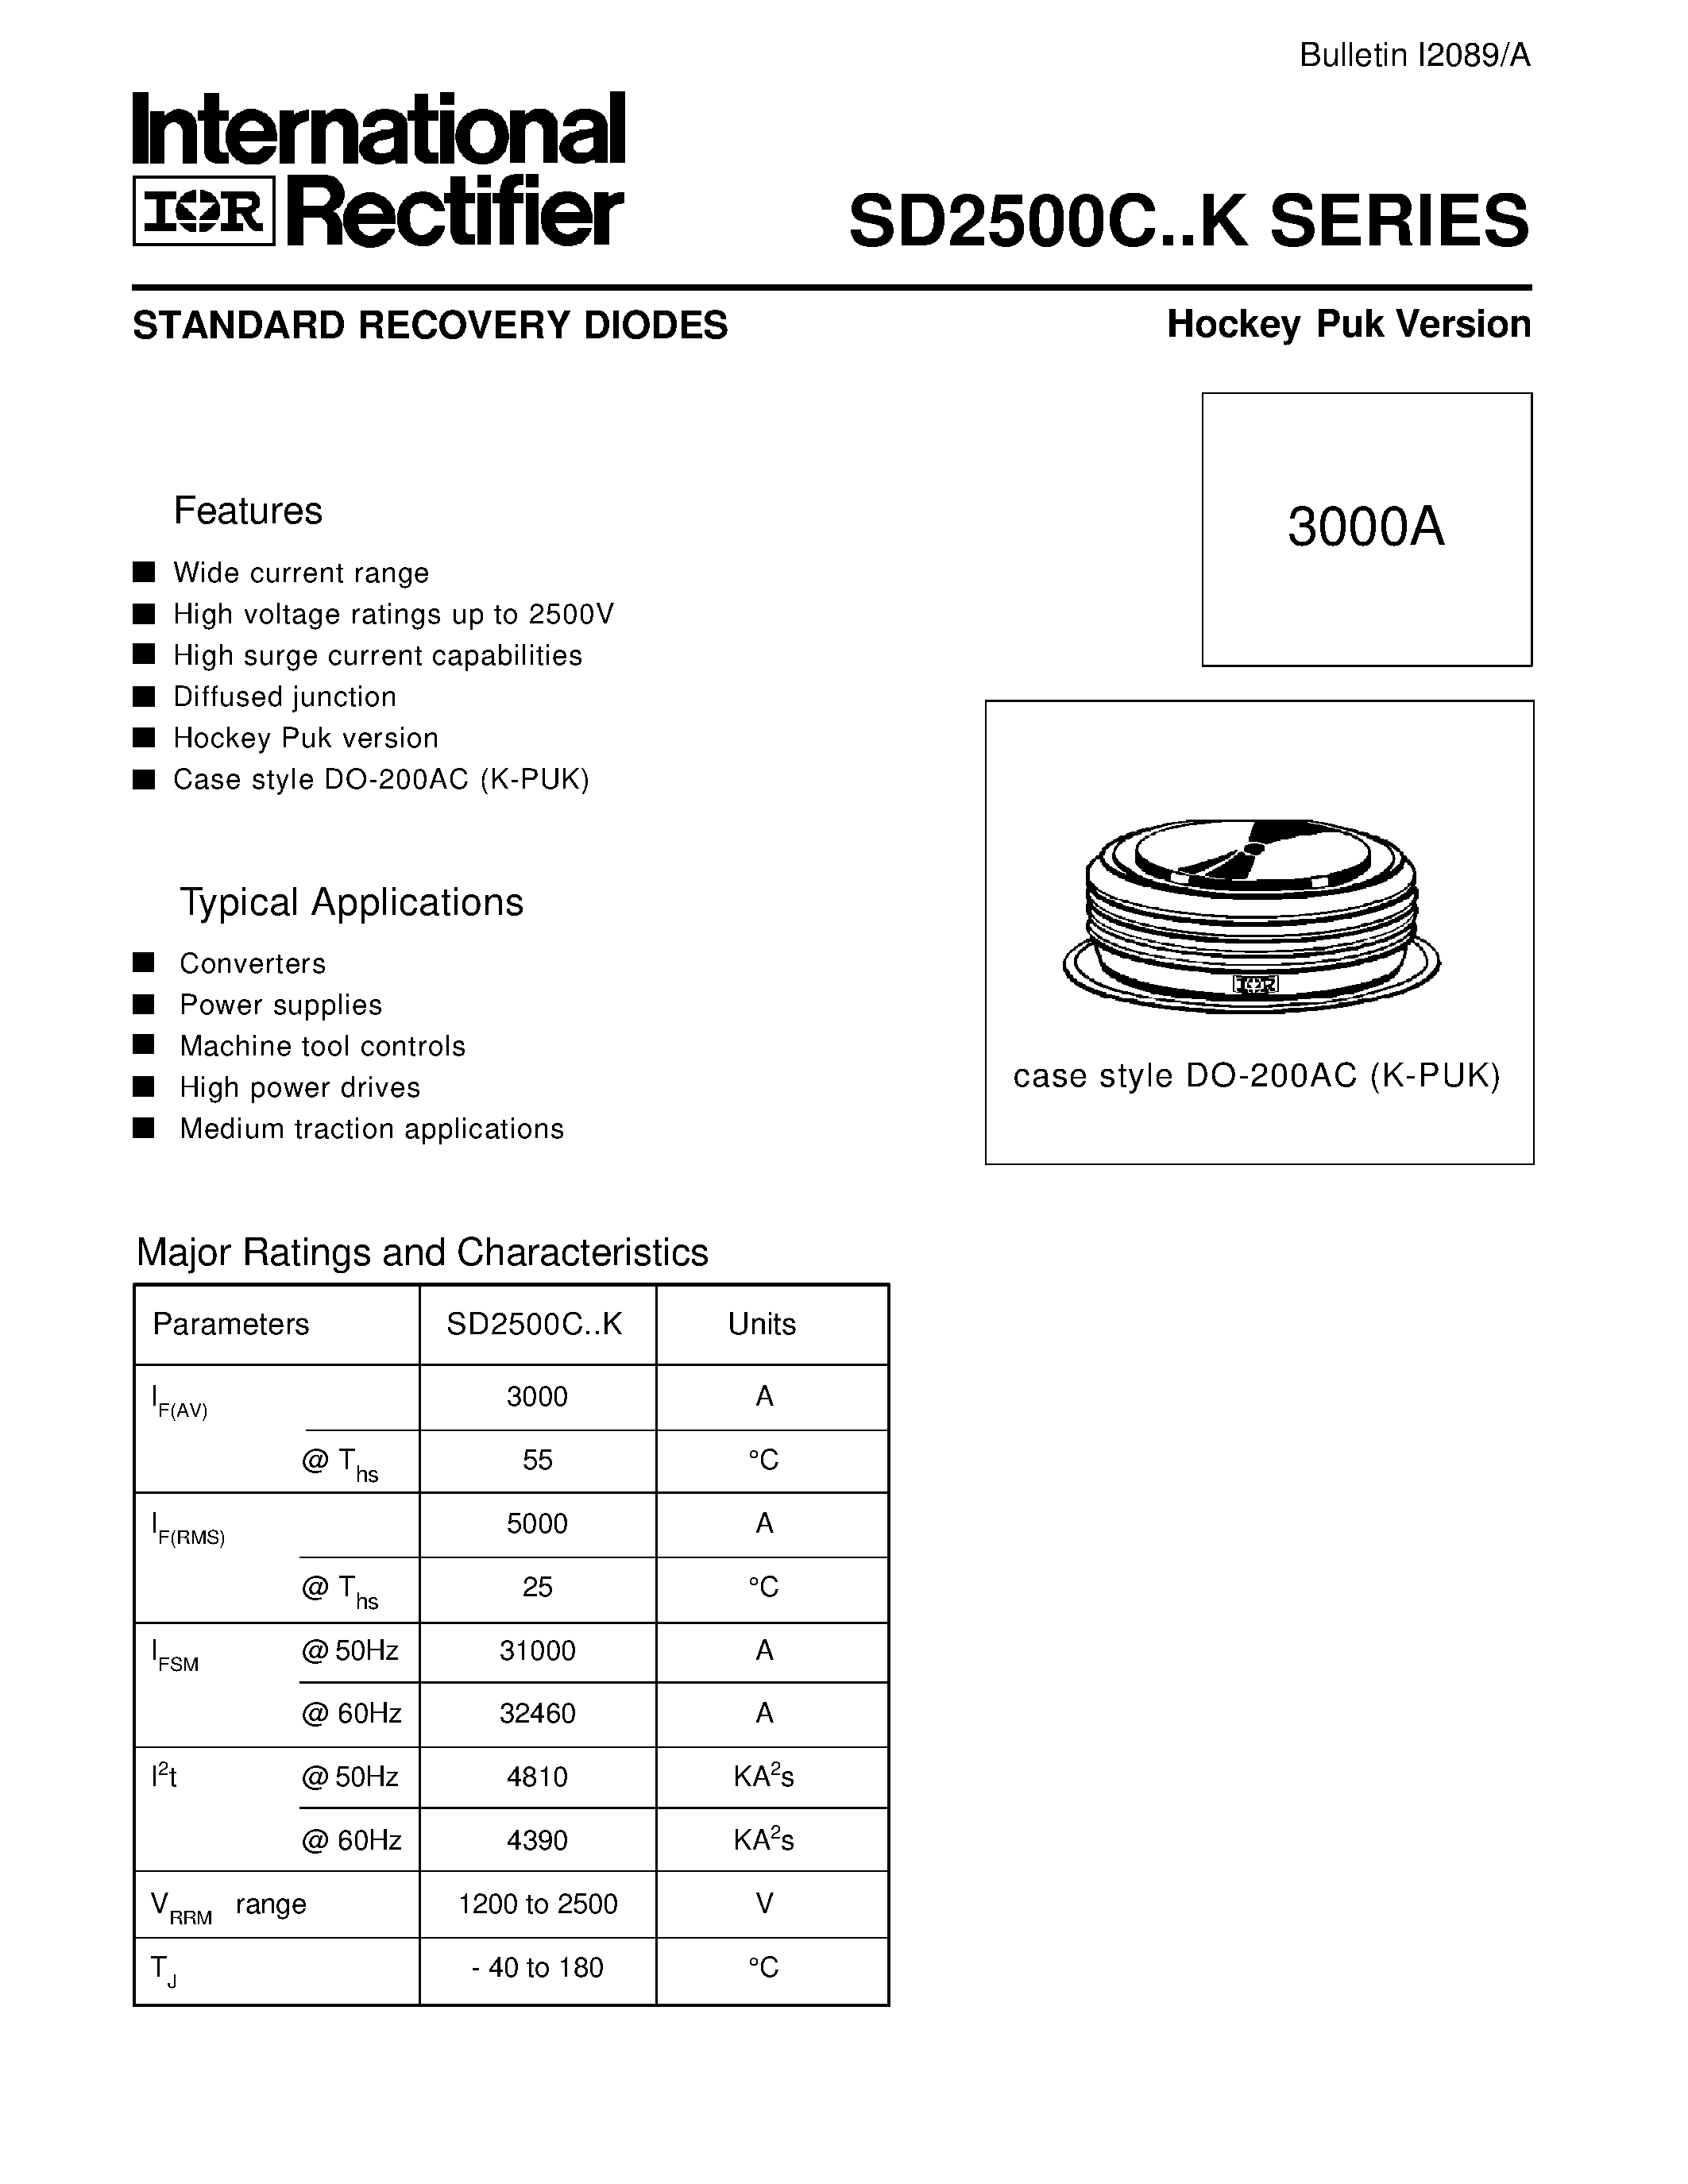 Datasheet SD2500C - STANDARD RECOVERY DIODES Hockey Puk Version page 2